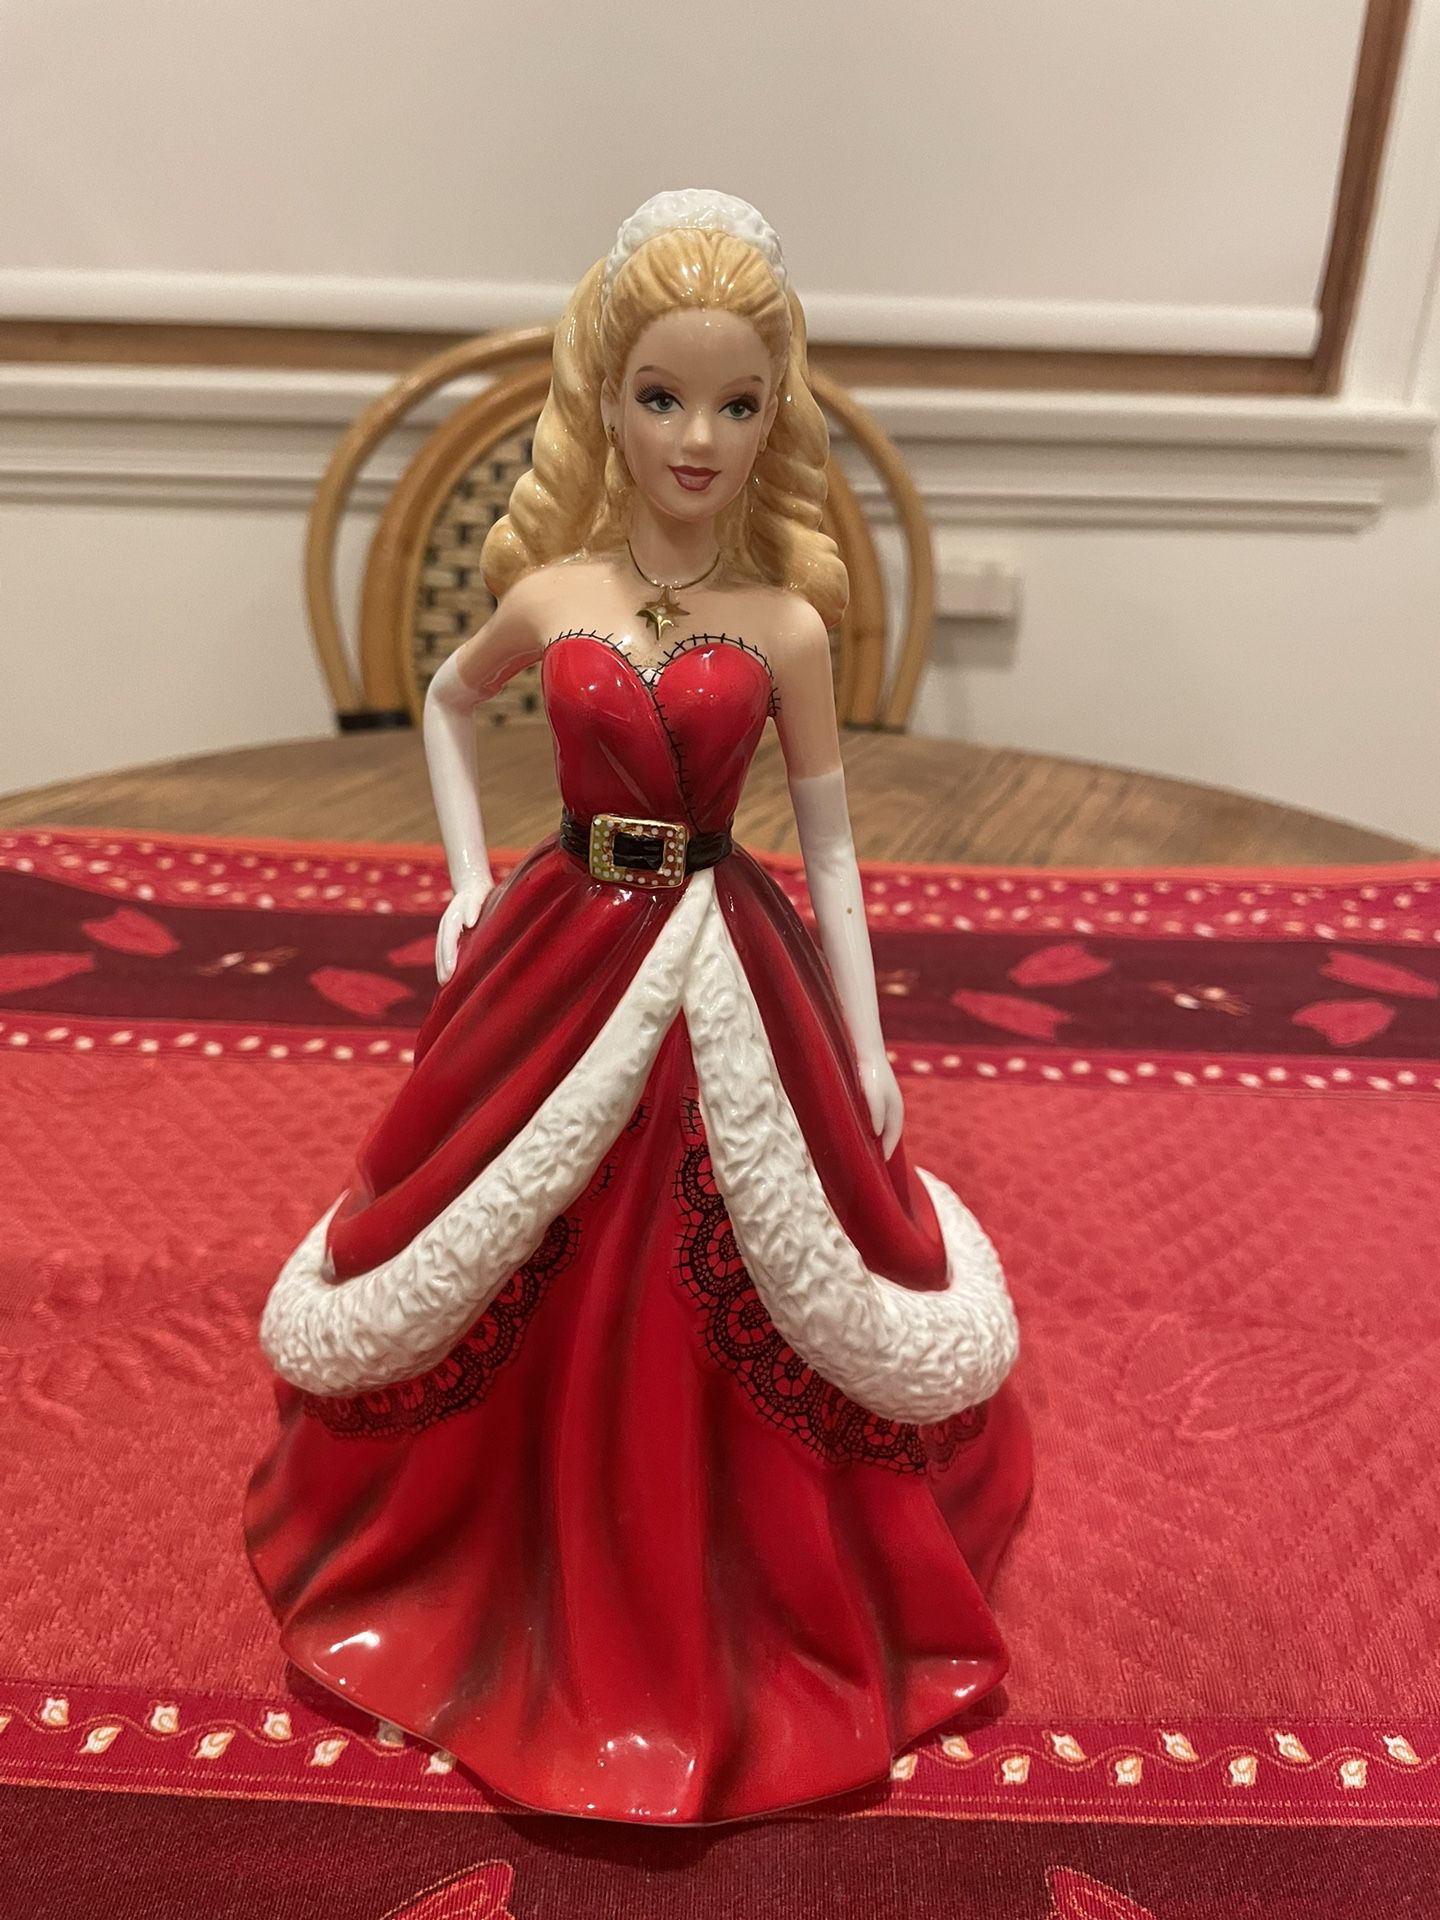 Royal Doulton 2011 Holiday Barbie Collection Figurine